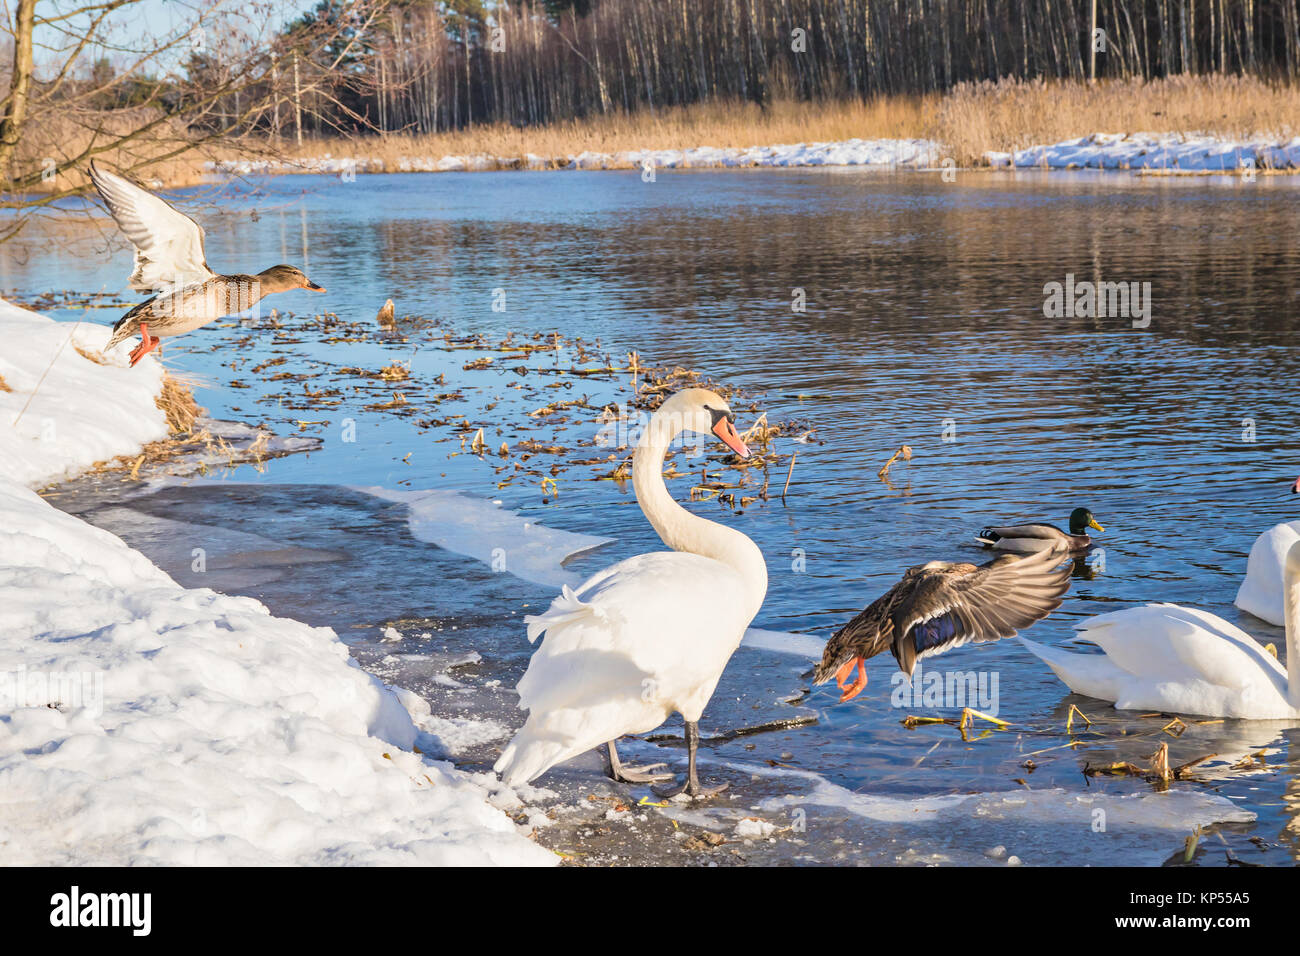 Swans and ducks in the winter nature Stock Photo